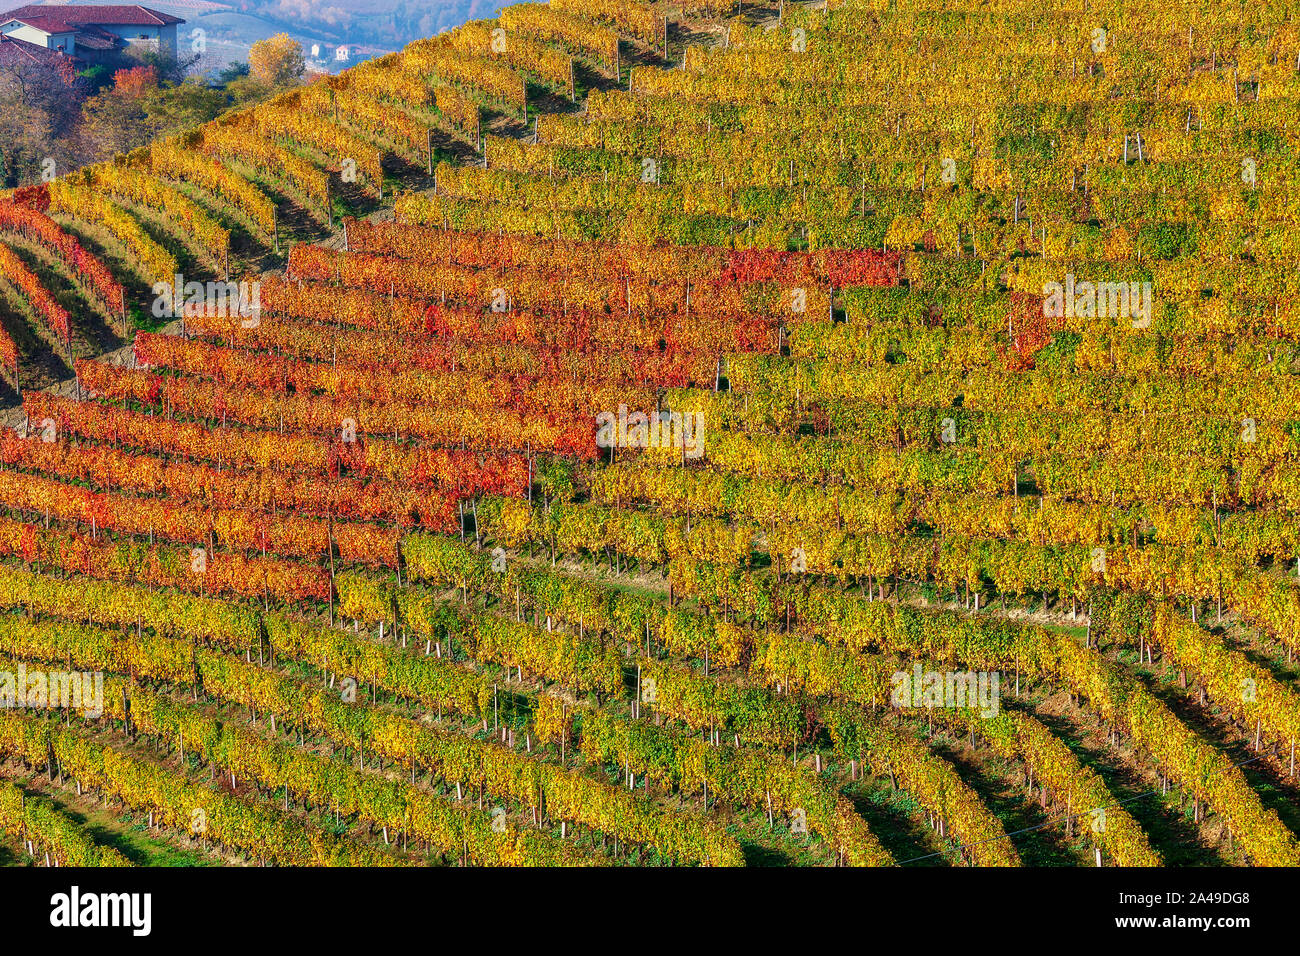 View of colorful vineyards on the hills of Langhe in fall in Piedmont, Northern Italy. Stock Photo